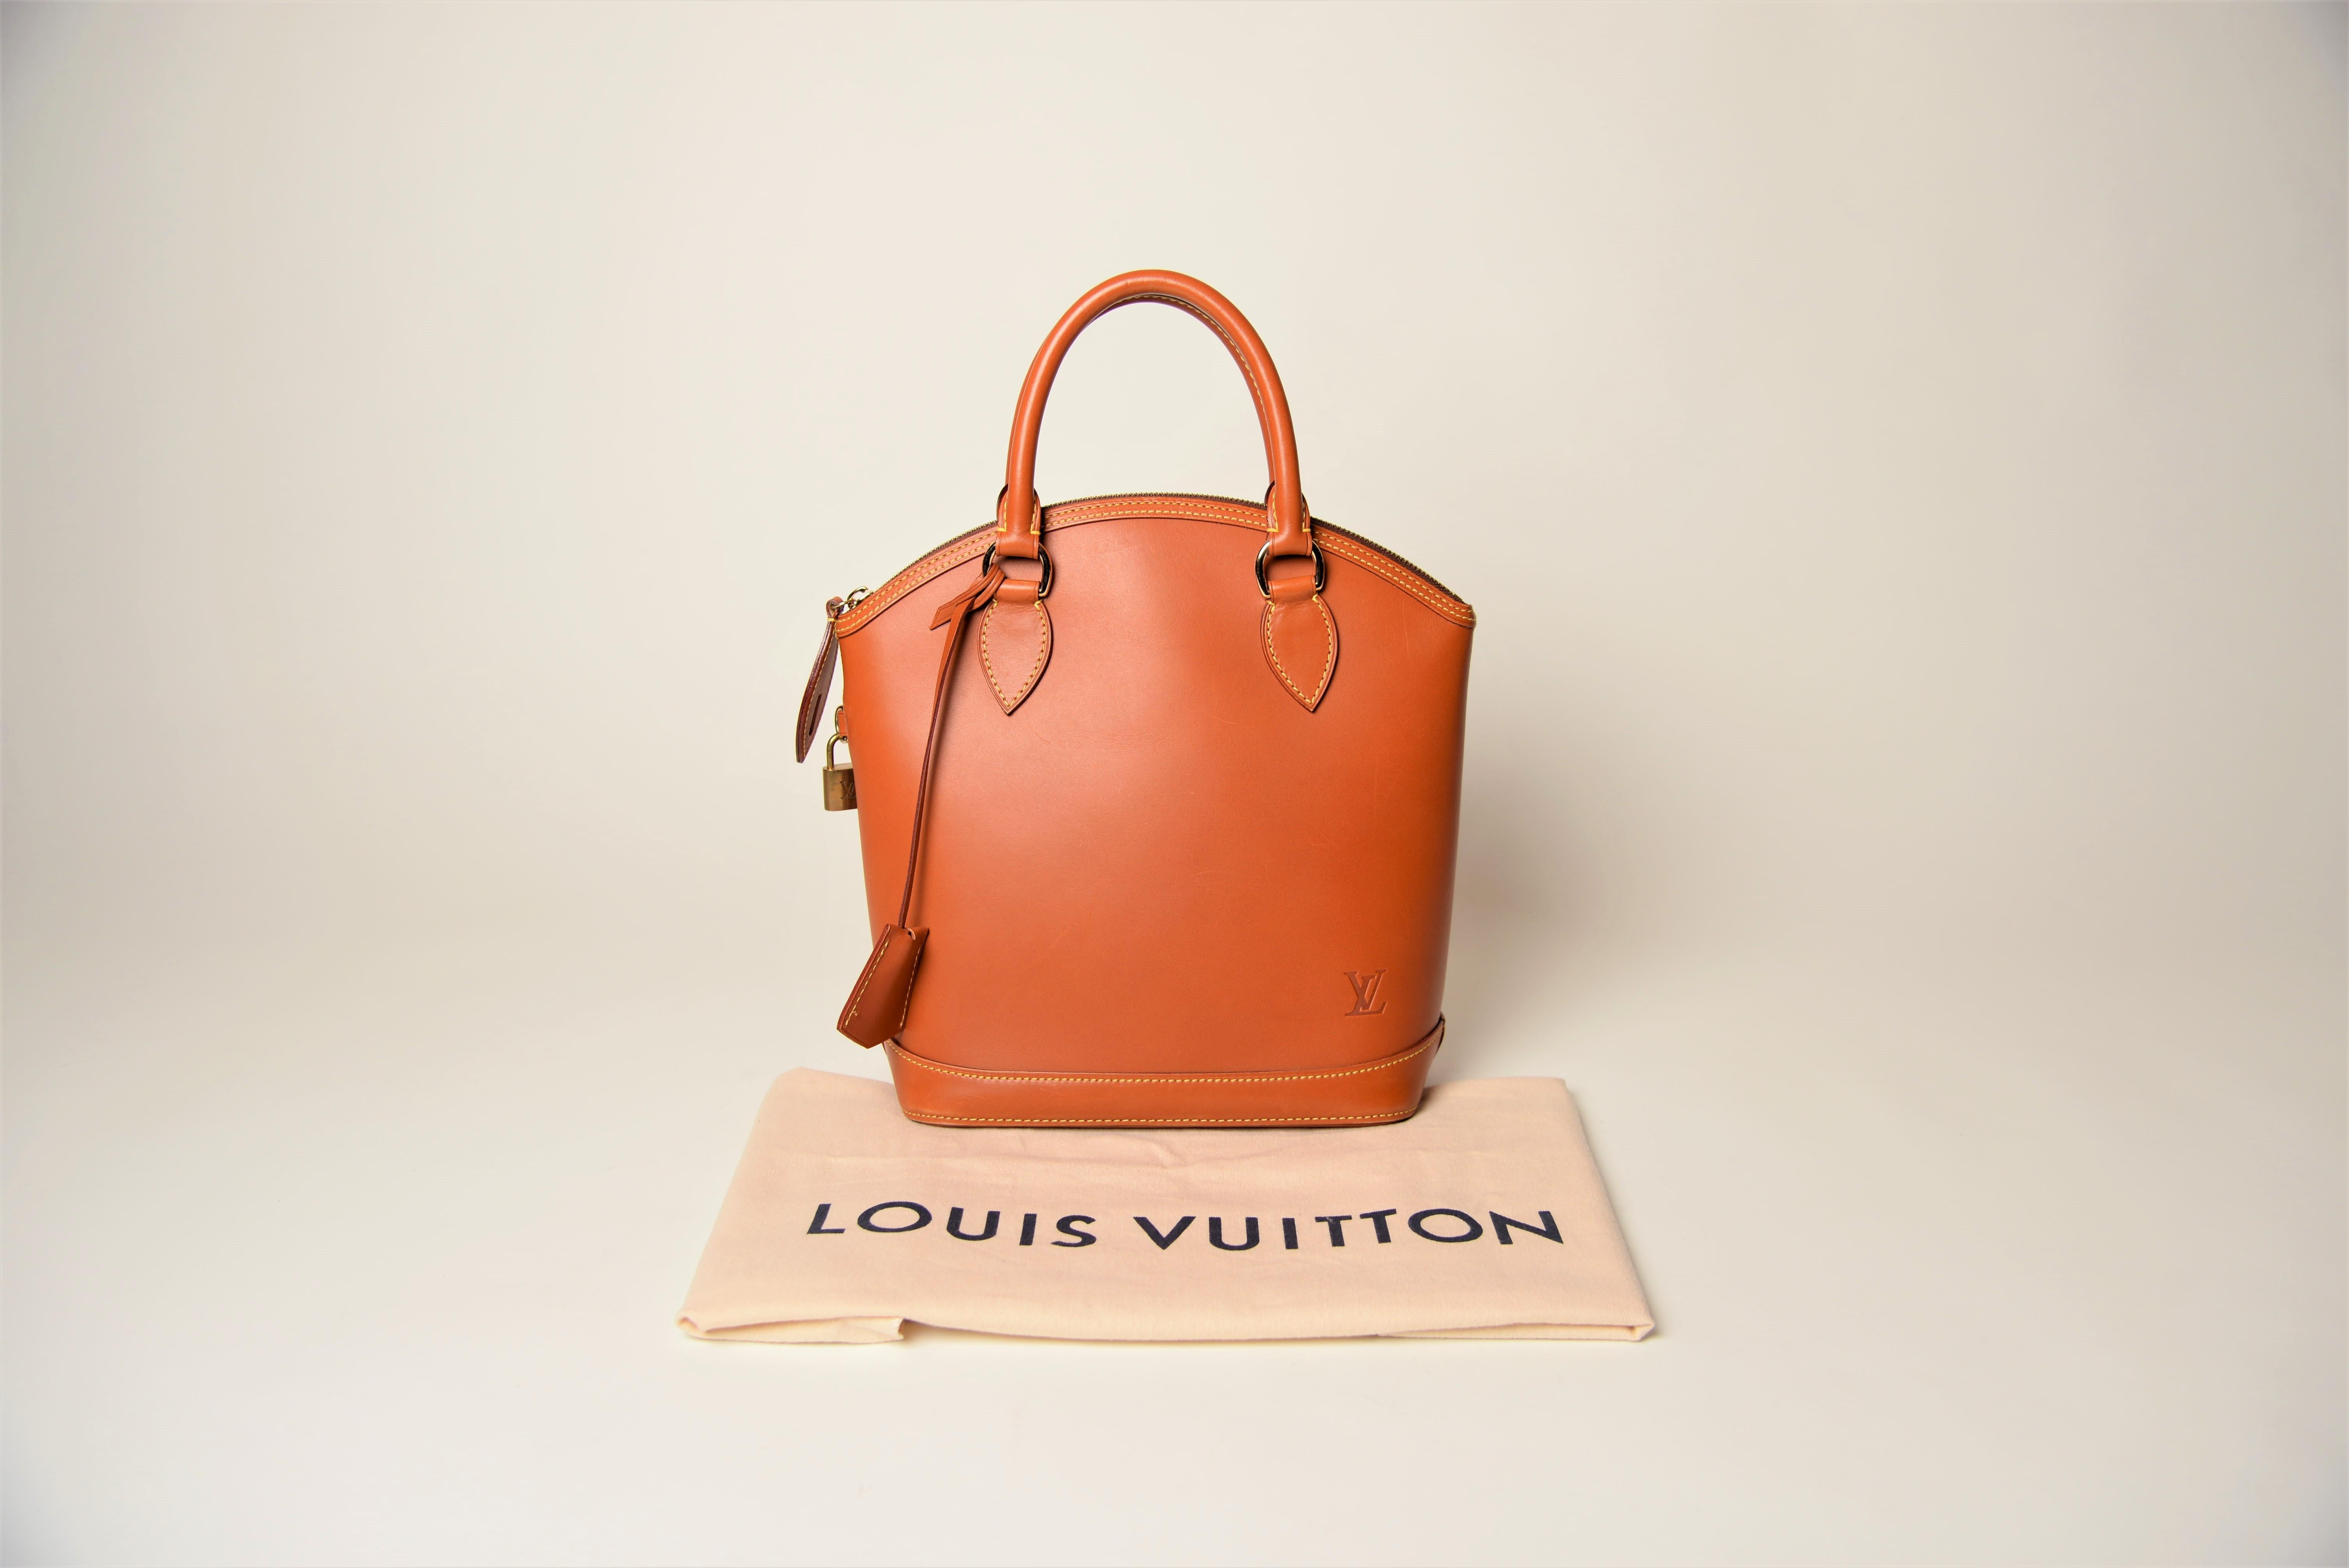 From the collection of SAVINETI we offer this Louis Vuitton Lockit Bag:
-	Brand: Louis Vuitton
-	Model: Lockit
-	Year: 2008
-	Condition: Good 
-	Materials: Rare Nomade Leather 
-	Extras: Louis Vuitton Dustbag, Lock + Keys

We at SAVINETI sell rare